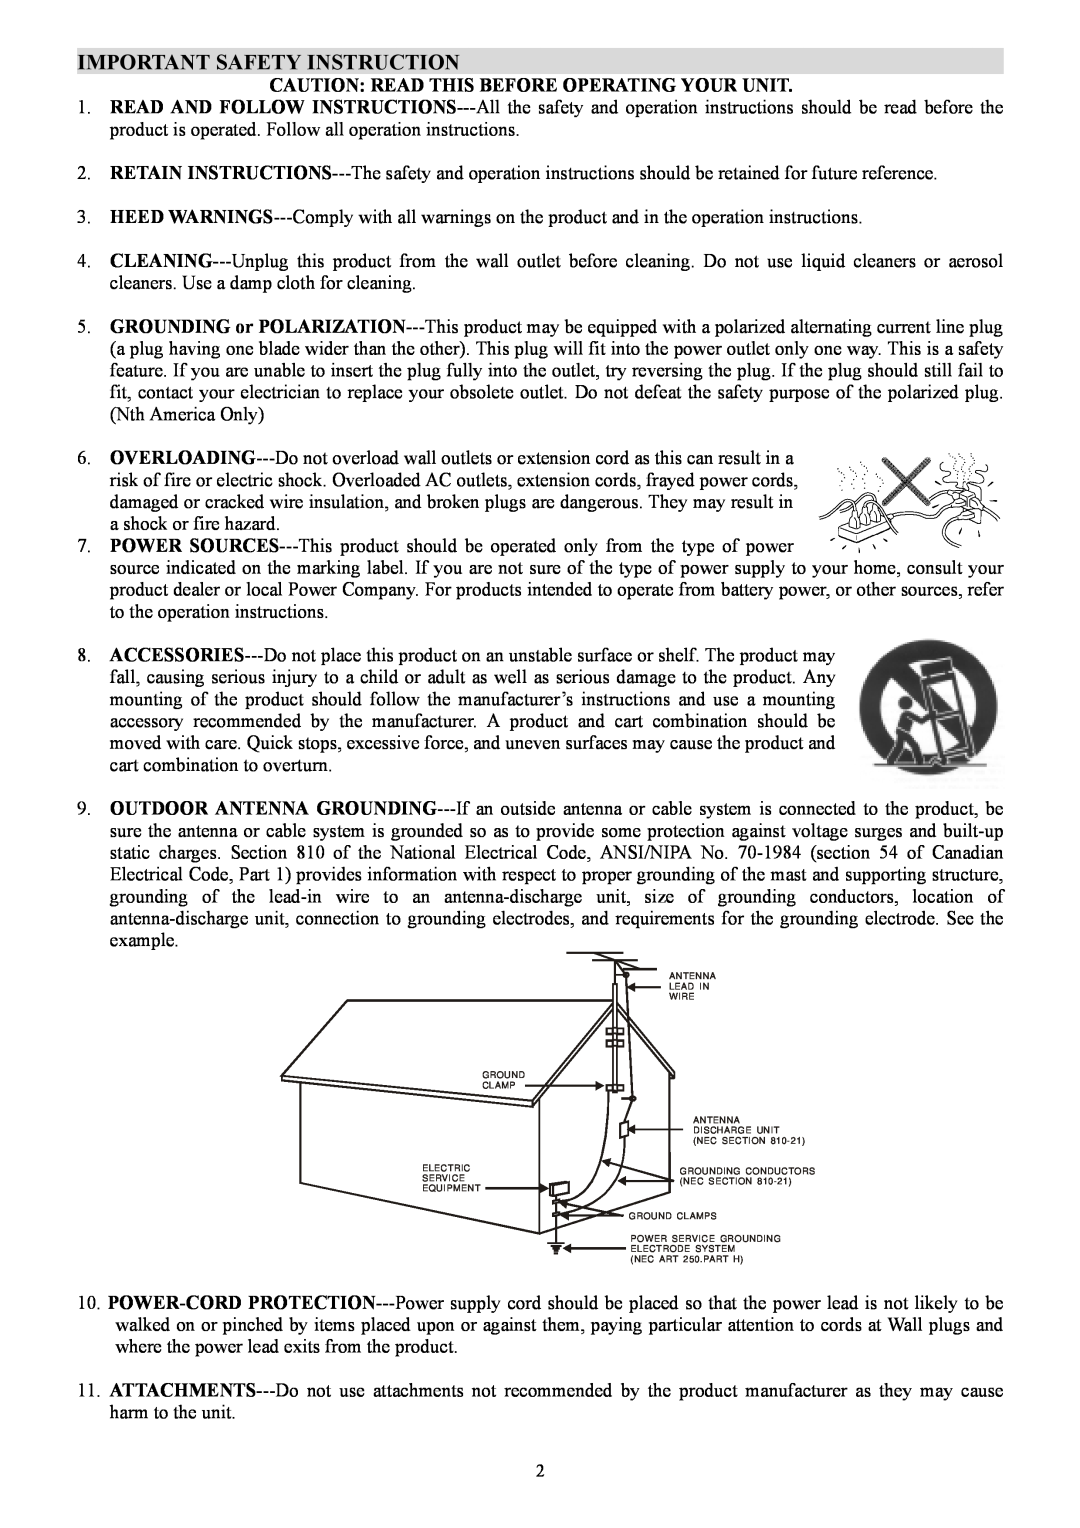 PYLE Audio PT-690A manual Important Safety Instruction, Caution Read This Before Operating Your Unit 